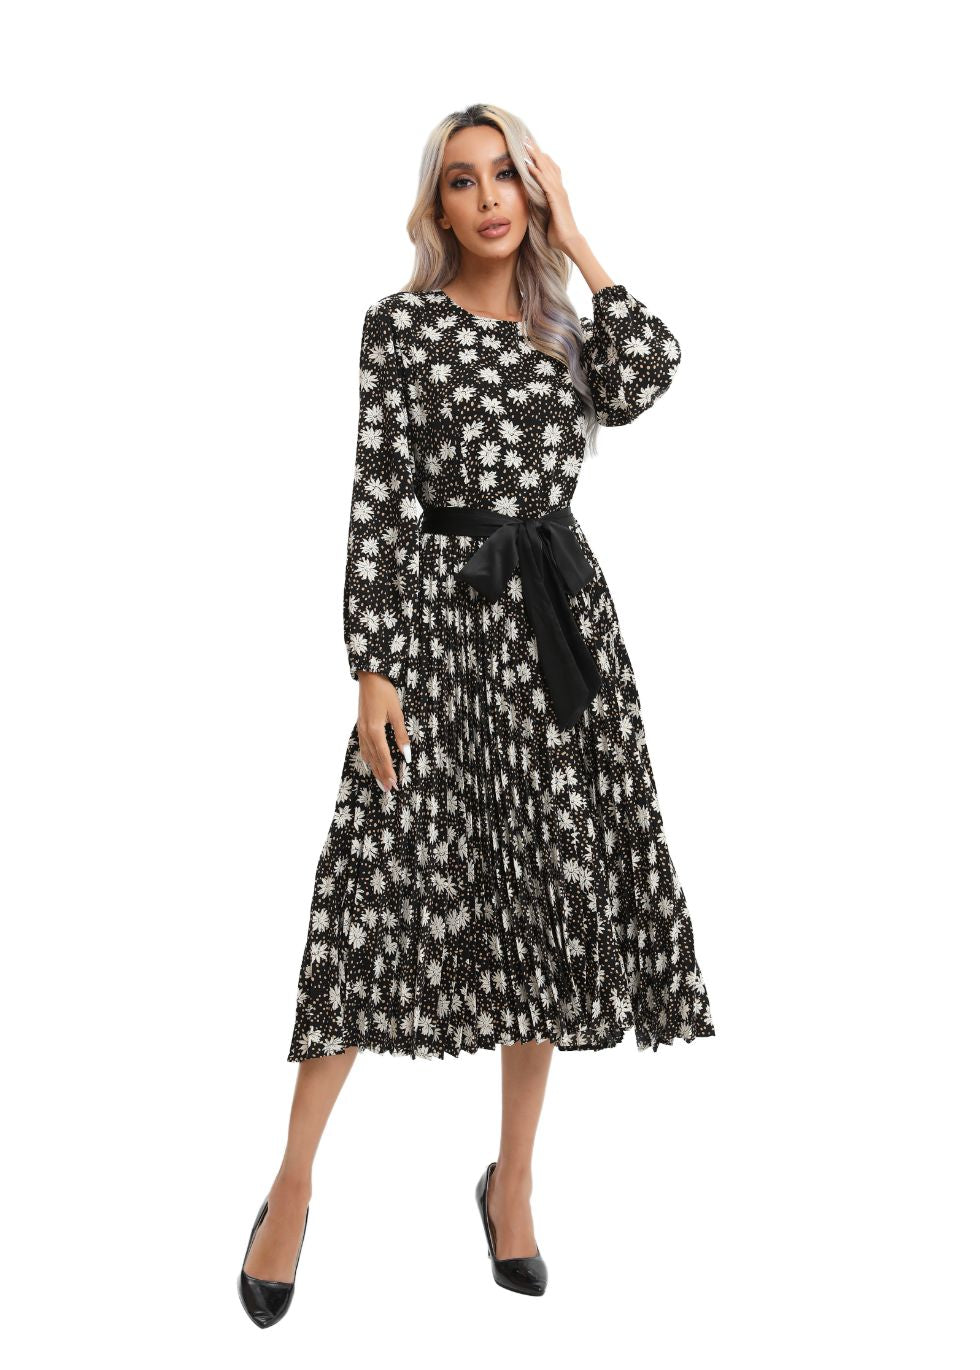 Modest Floral Midi Dress with Front Tie - alamaud